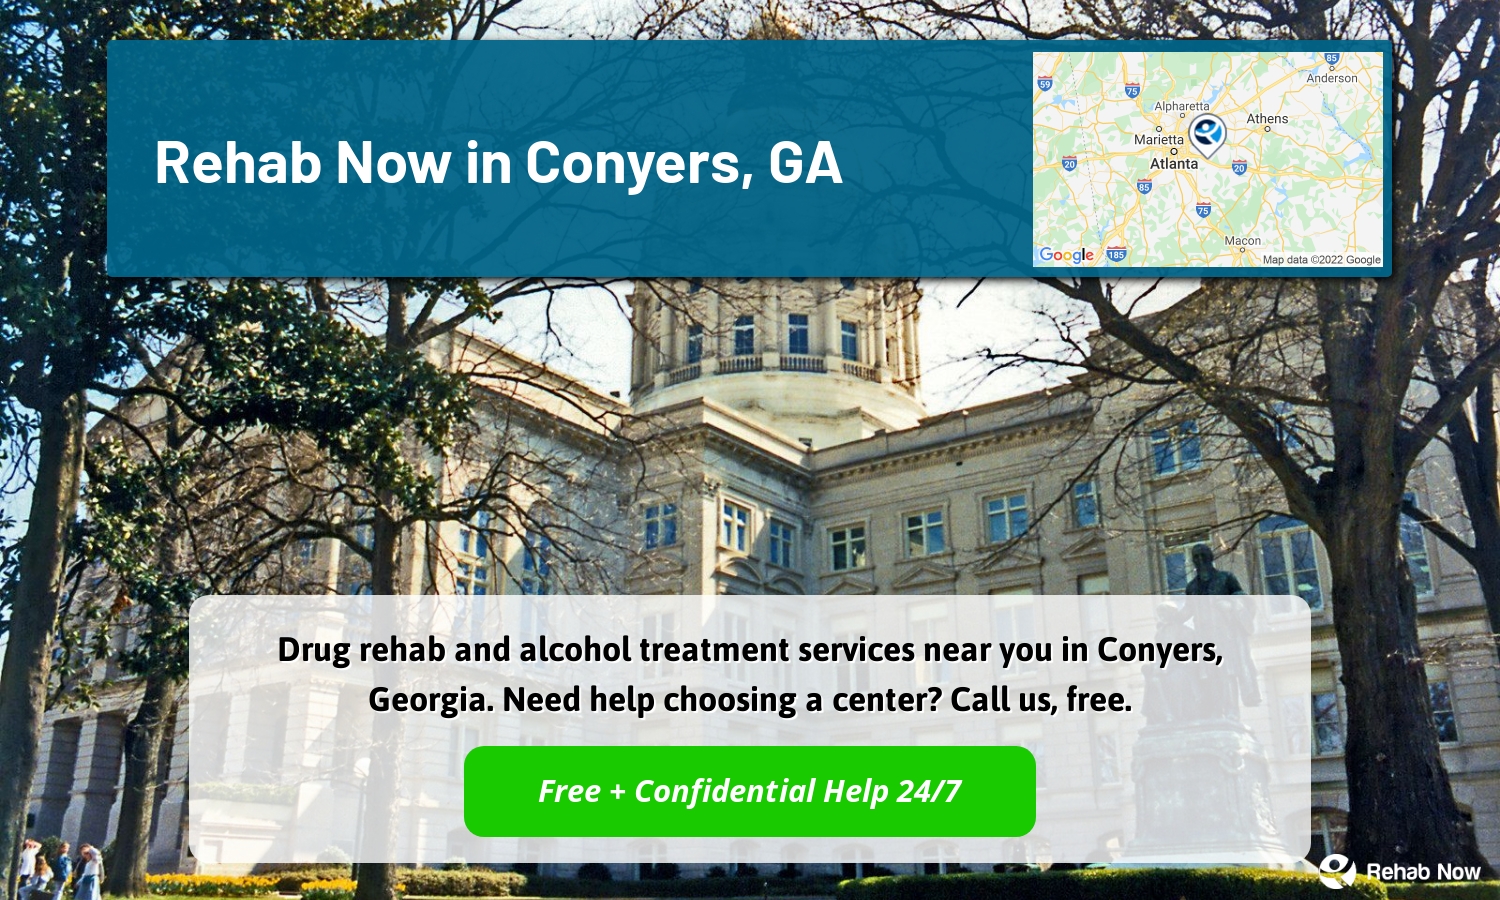 Drug rehab and alcohol treatment services near you in Conyers, Georgia. Need help choosing a center? Call us, free.